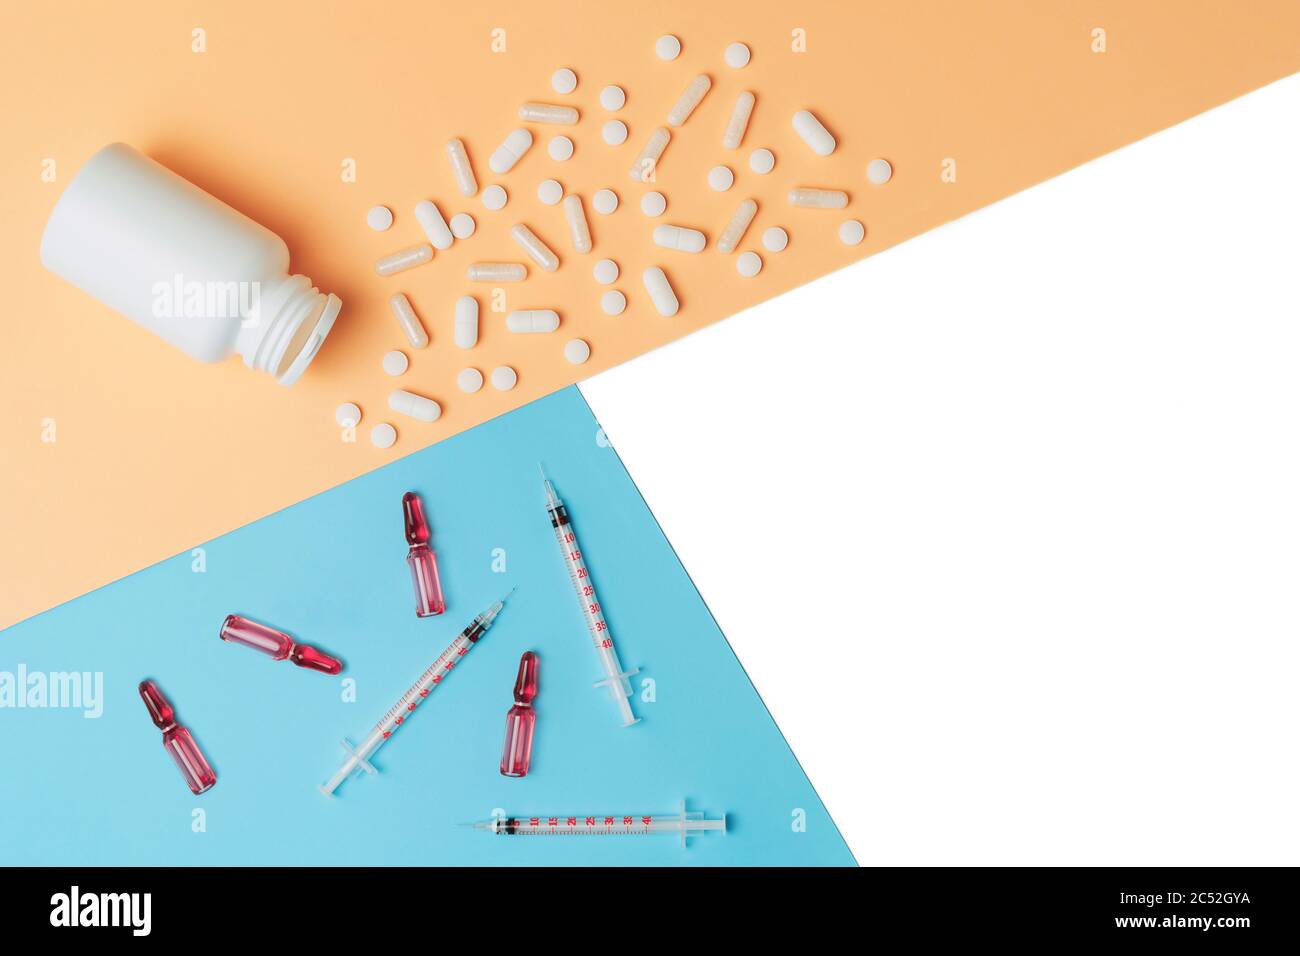 Mock-up bottle with spilled tablets and syringes with ampules on isolated white, orange and blue background. Cosmetology and medicine concept. Flat lay. Stock Photo